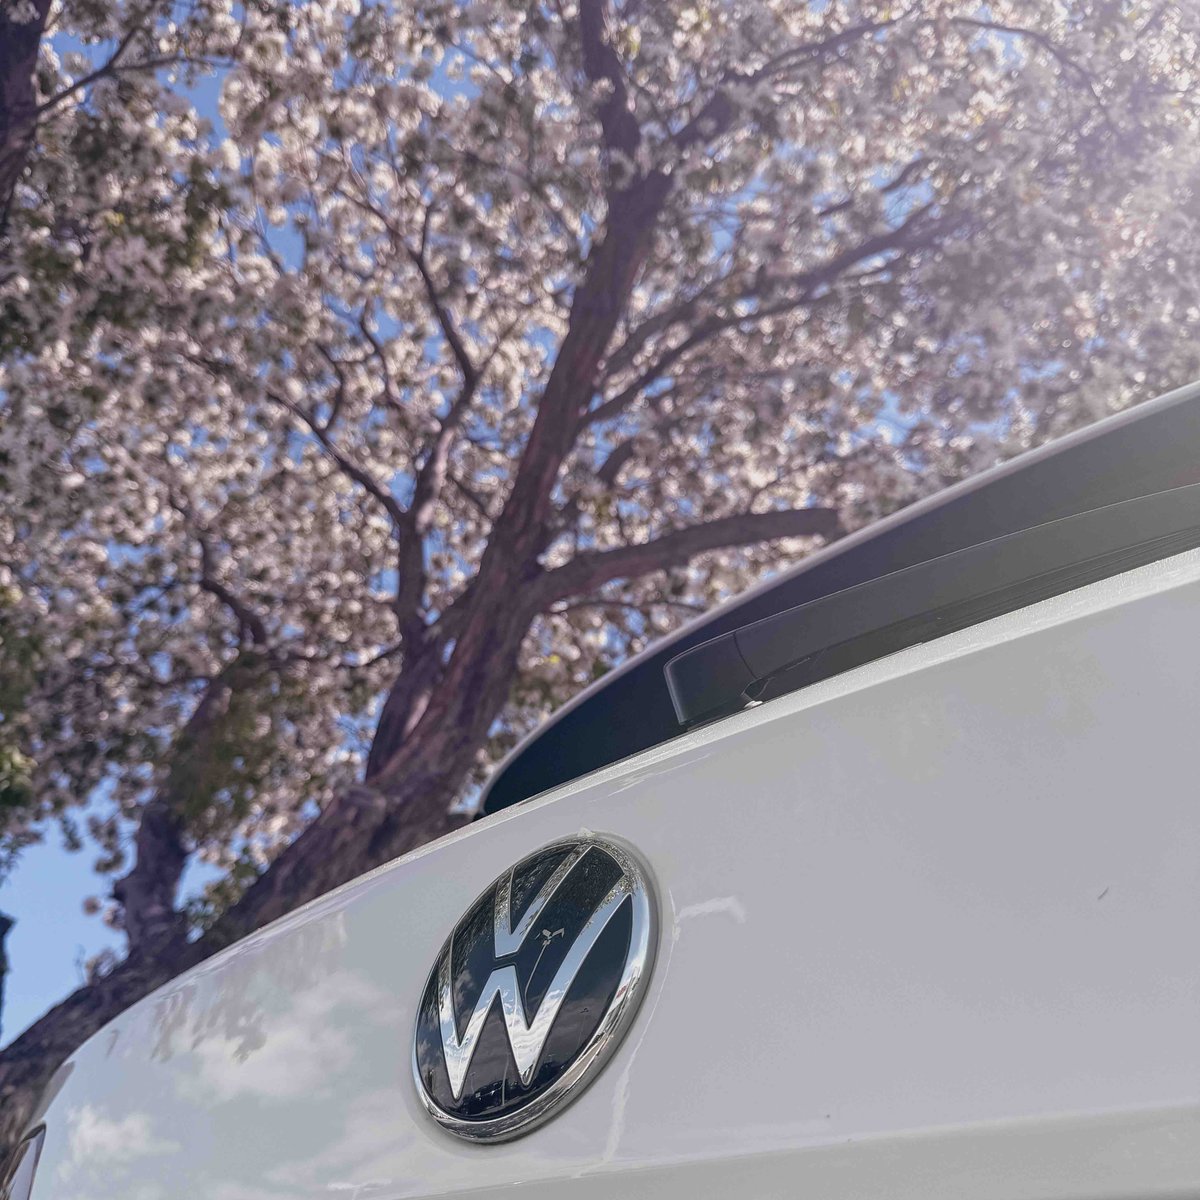 Happy May! Here’s to hoping all those April showers pay off with more May flowers! 🌸 

#volkswagen #vw #vwlove #vwlovers #vdub #vdublove #vwfamily #greeley #colorado #colorfulcolorado